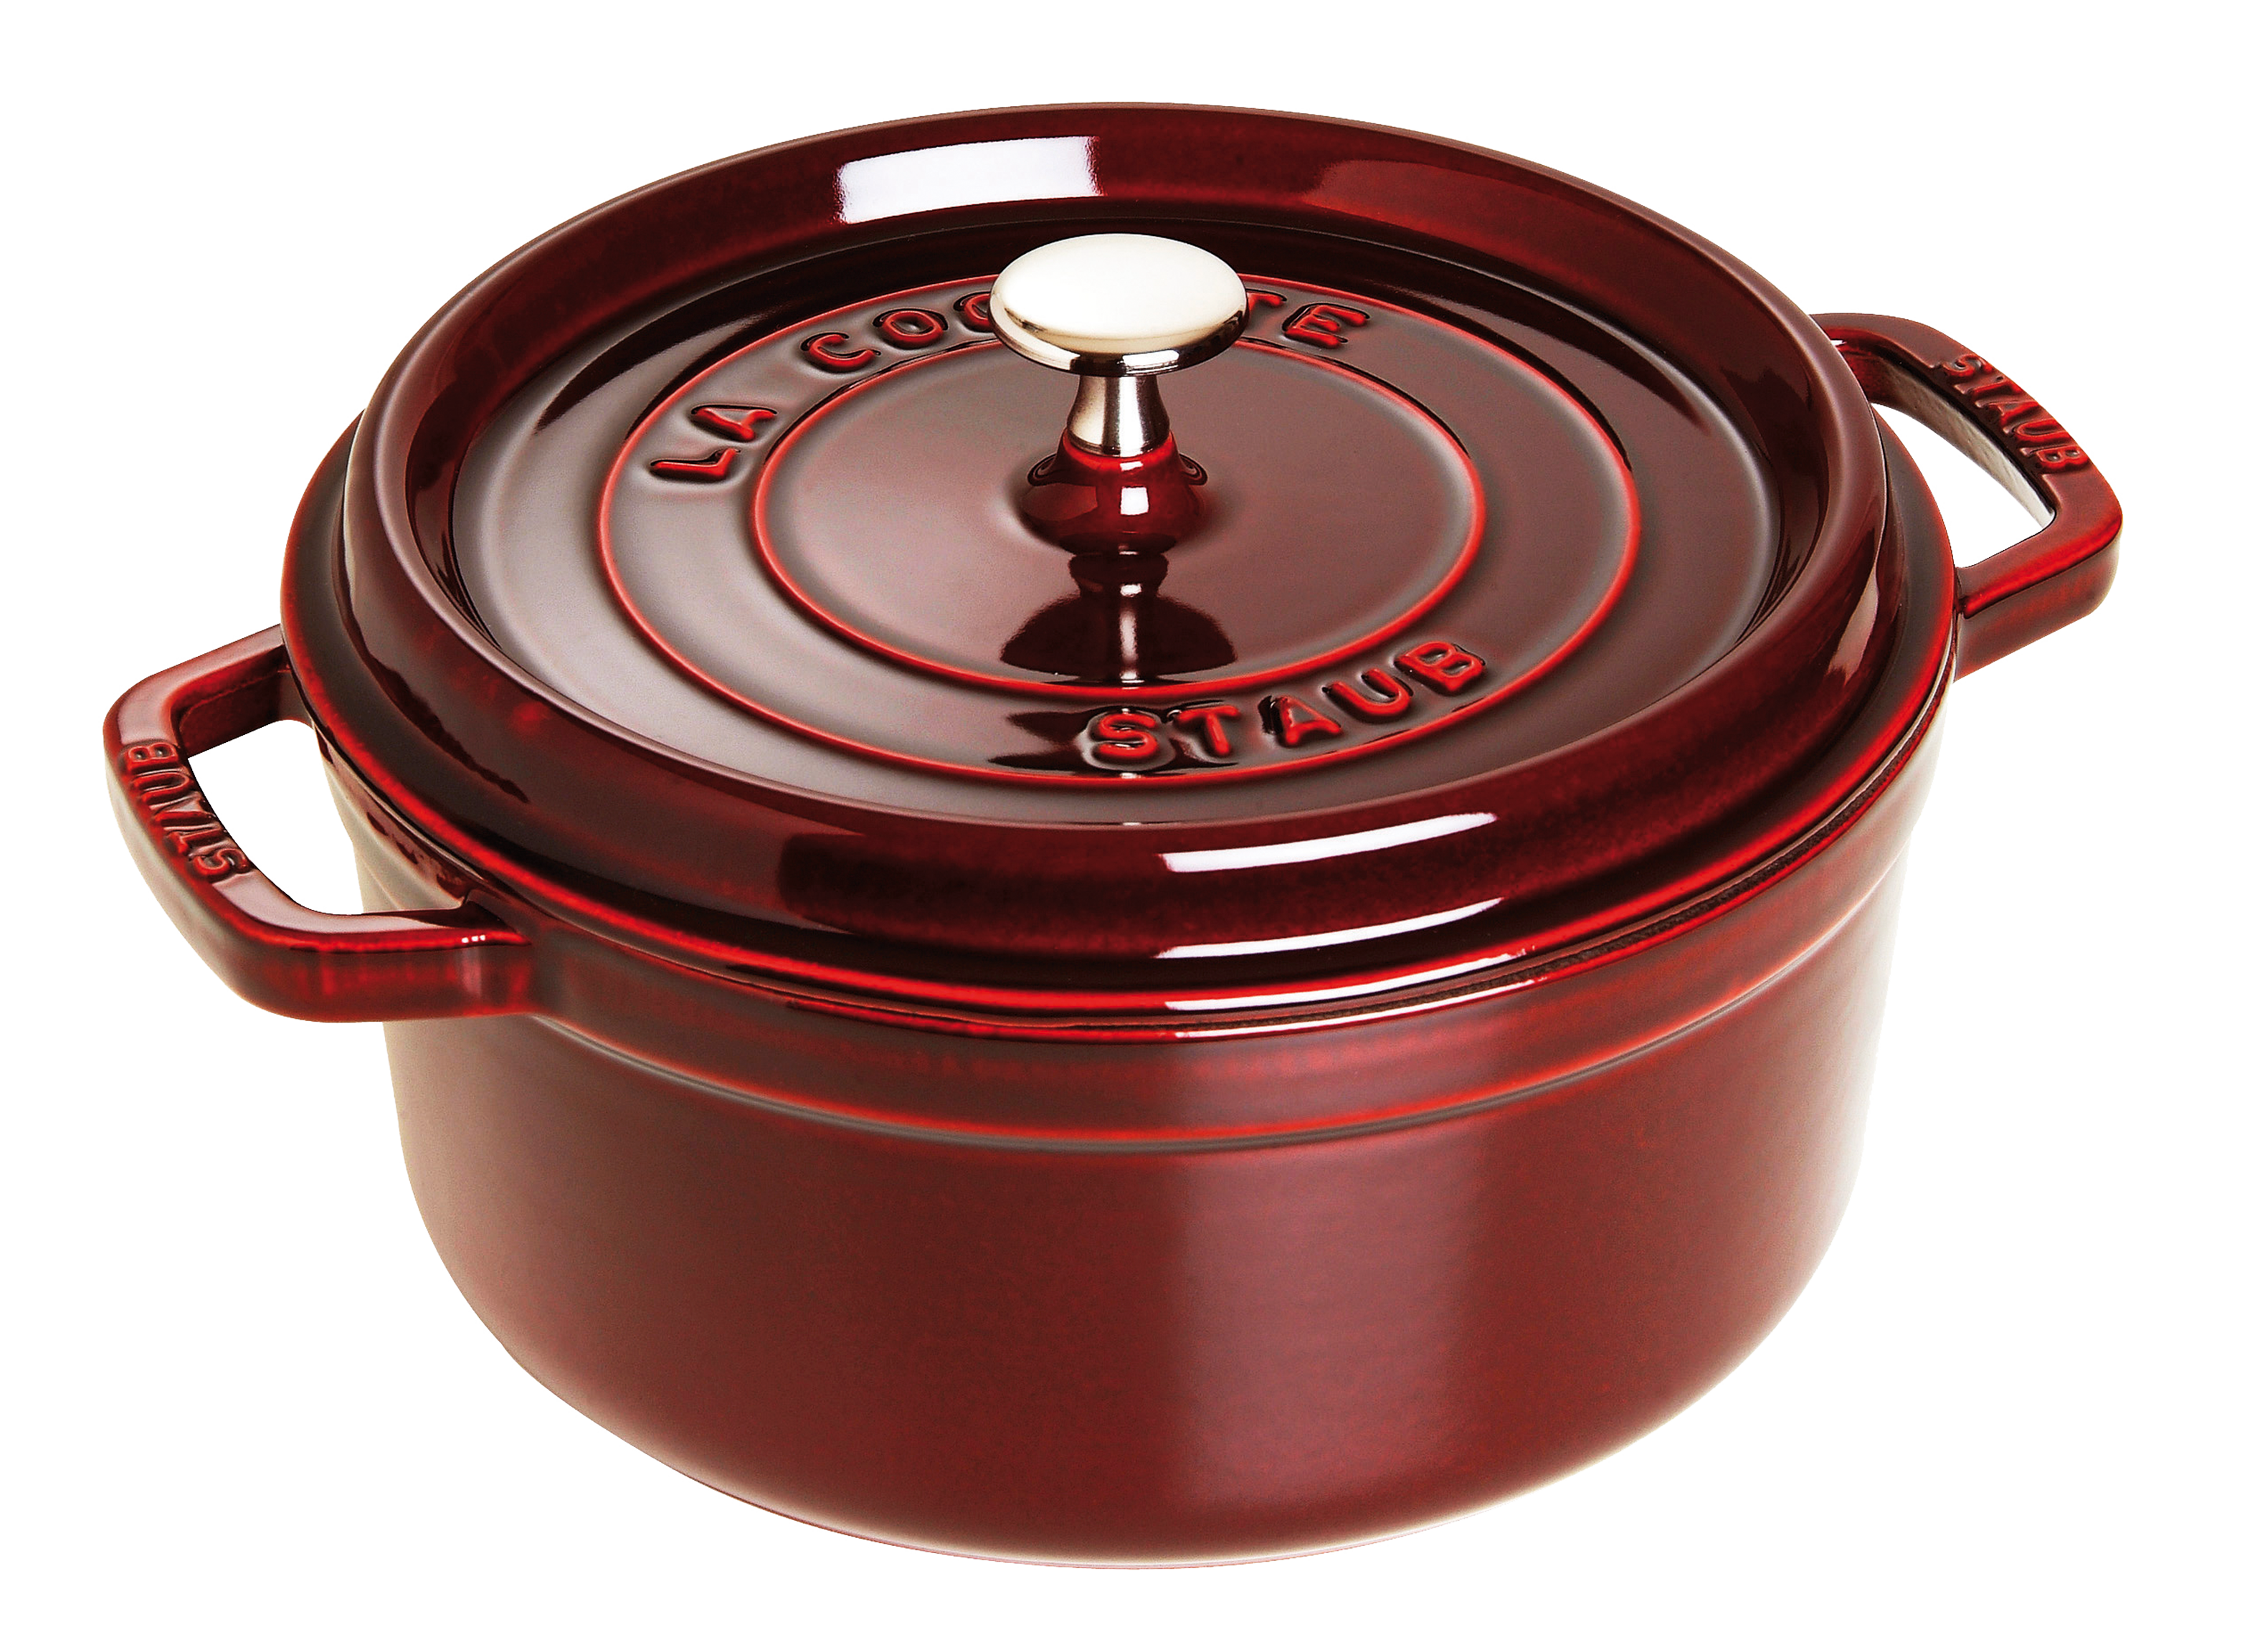 https://crdms.images.consumerreports.org/prod/products/cr/models/396579-dutch-ovens-staub-round-cocotte-10000646.png